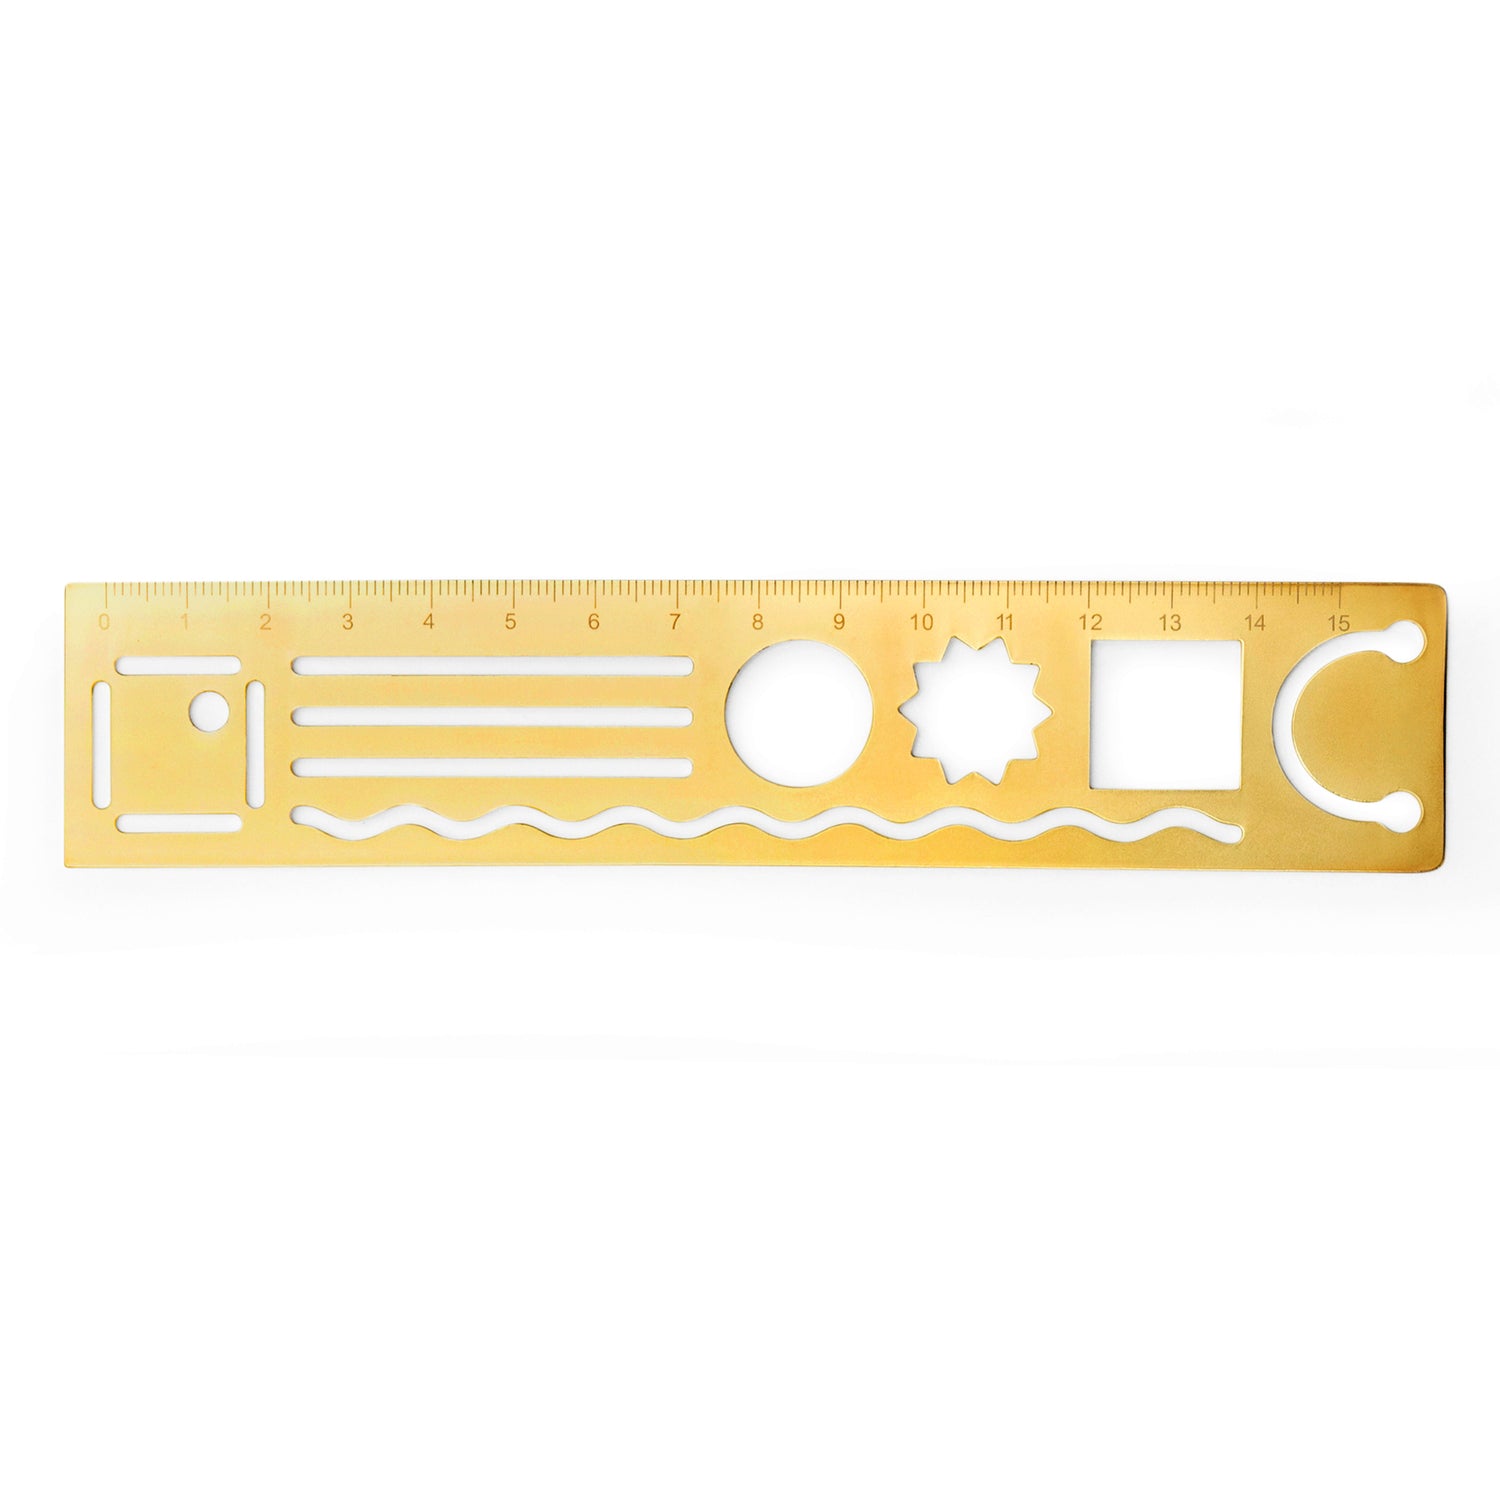 3-pack Metal Stencil Bookmark DIY Stencil Templates for Engraving